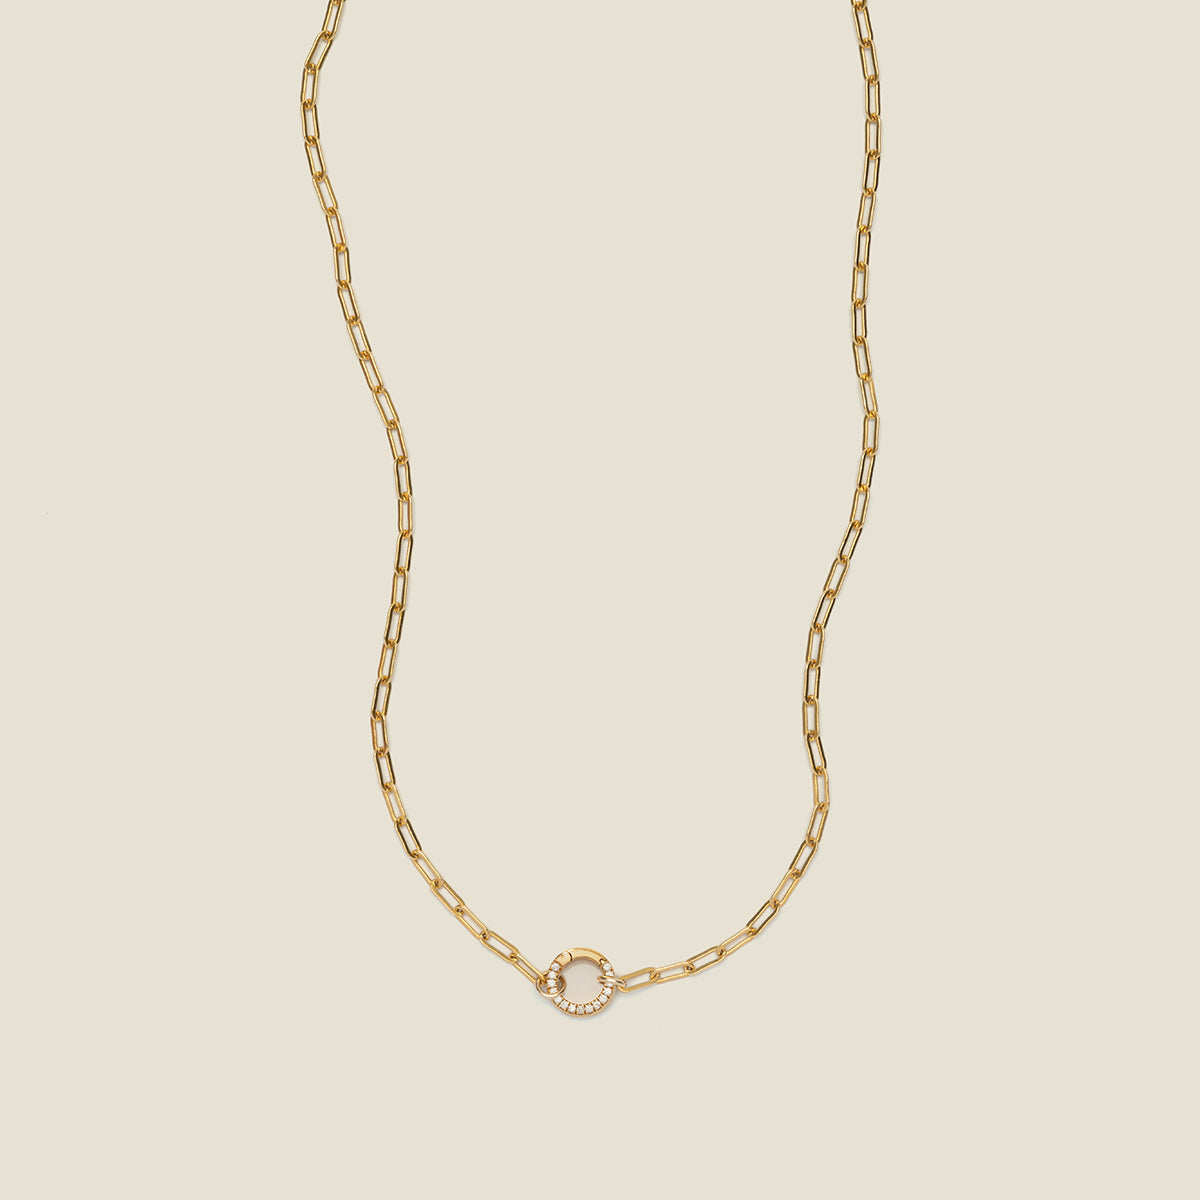 Jude Charm Necklace Gold Filled / With CZ Link Lock Necklace